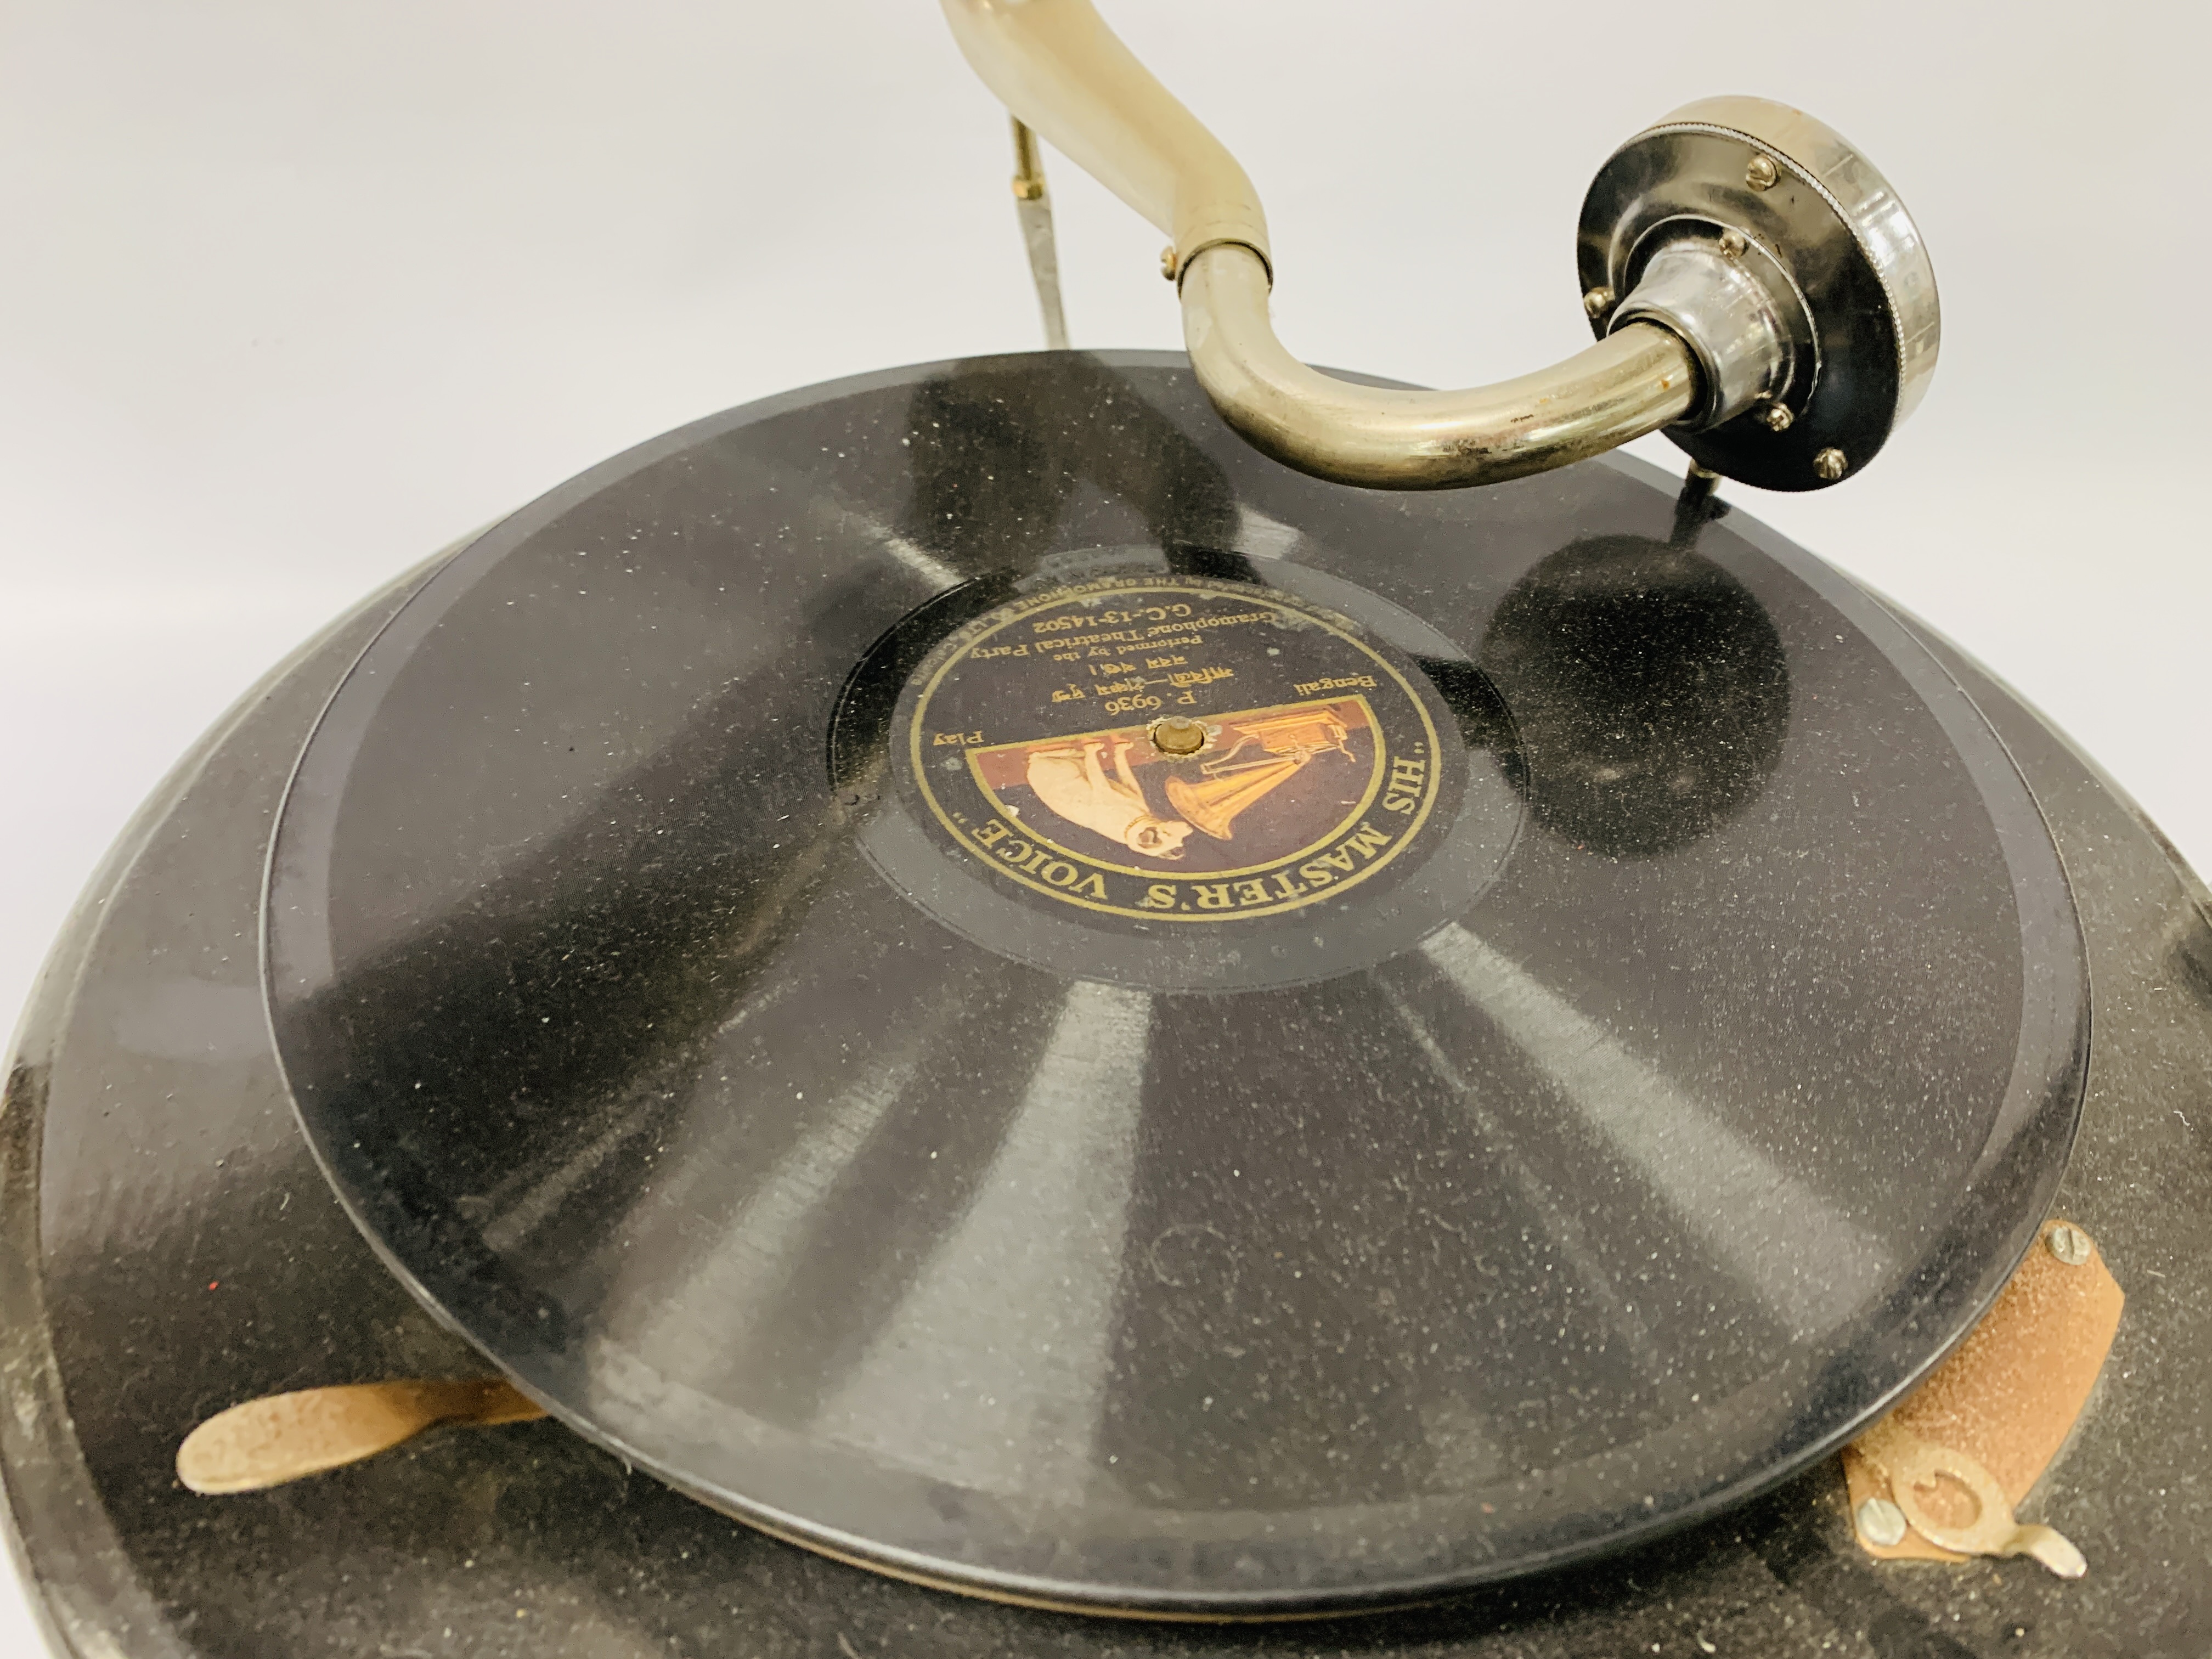 A TABLE TOP WIND UP HORN GRAMOPHONE MARKED "HIS MASTERS VOICE" - Image 4 of 8